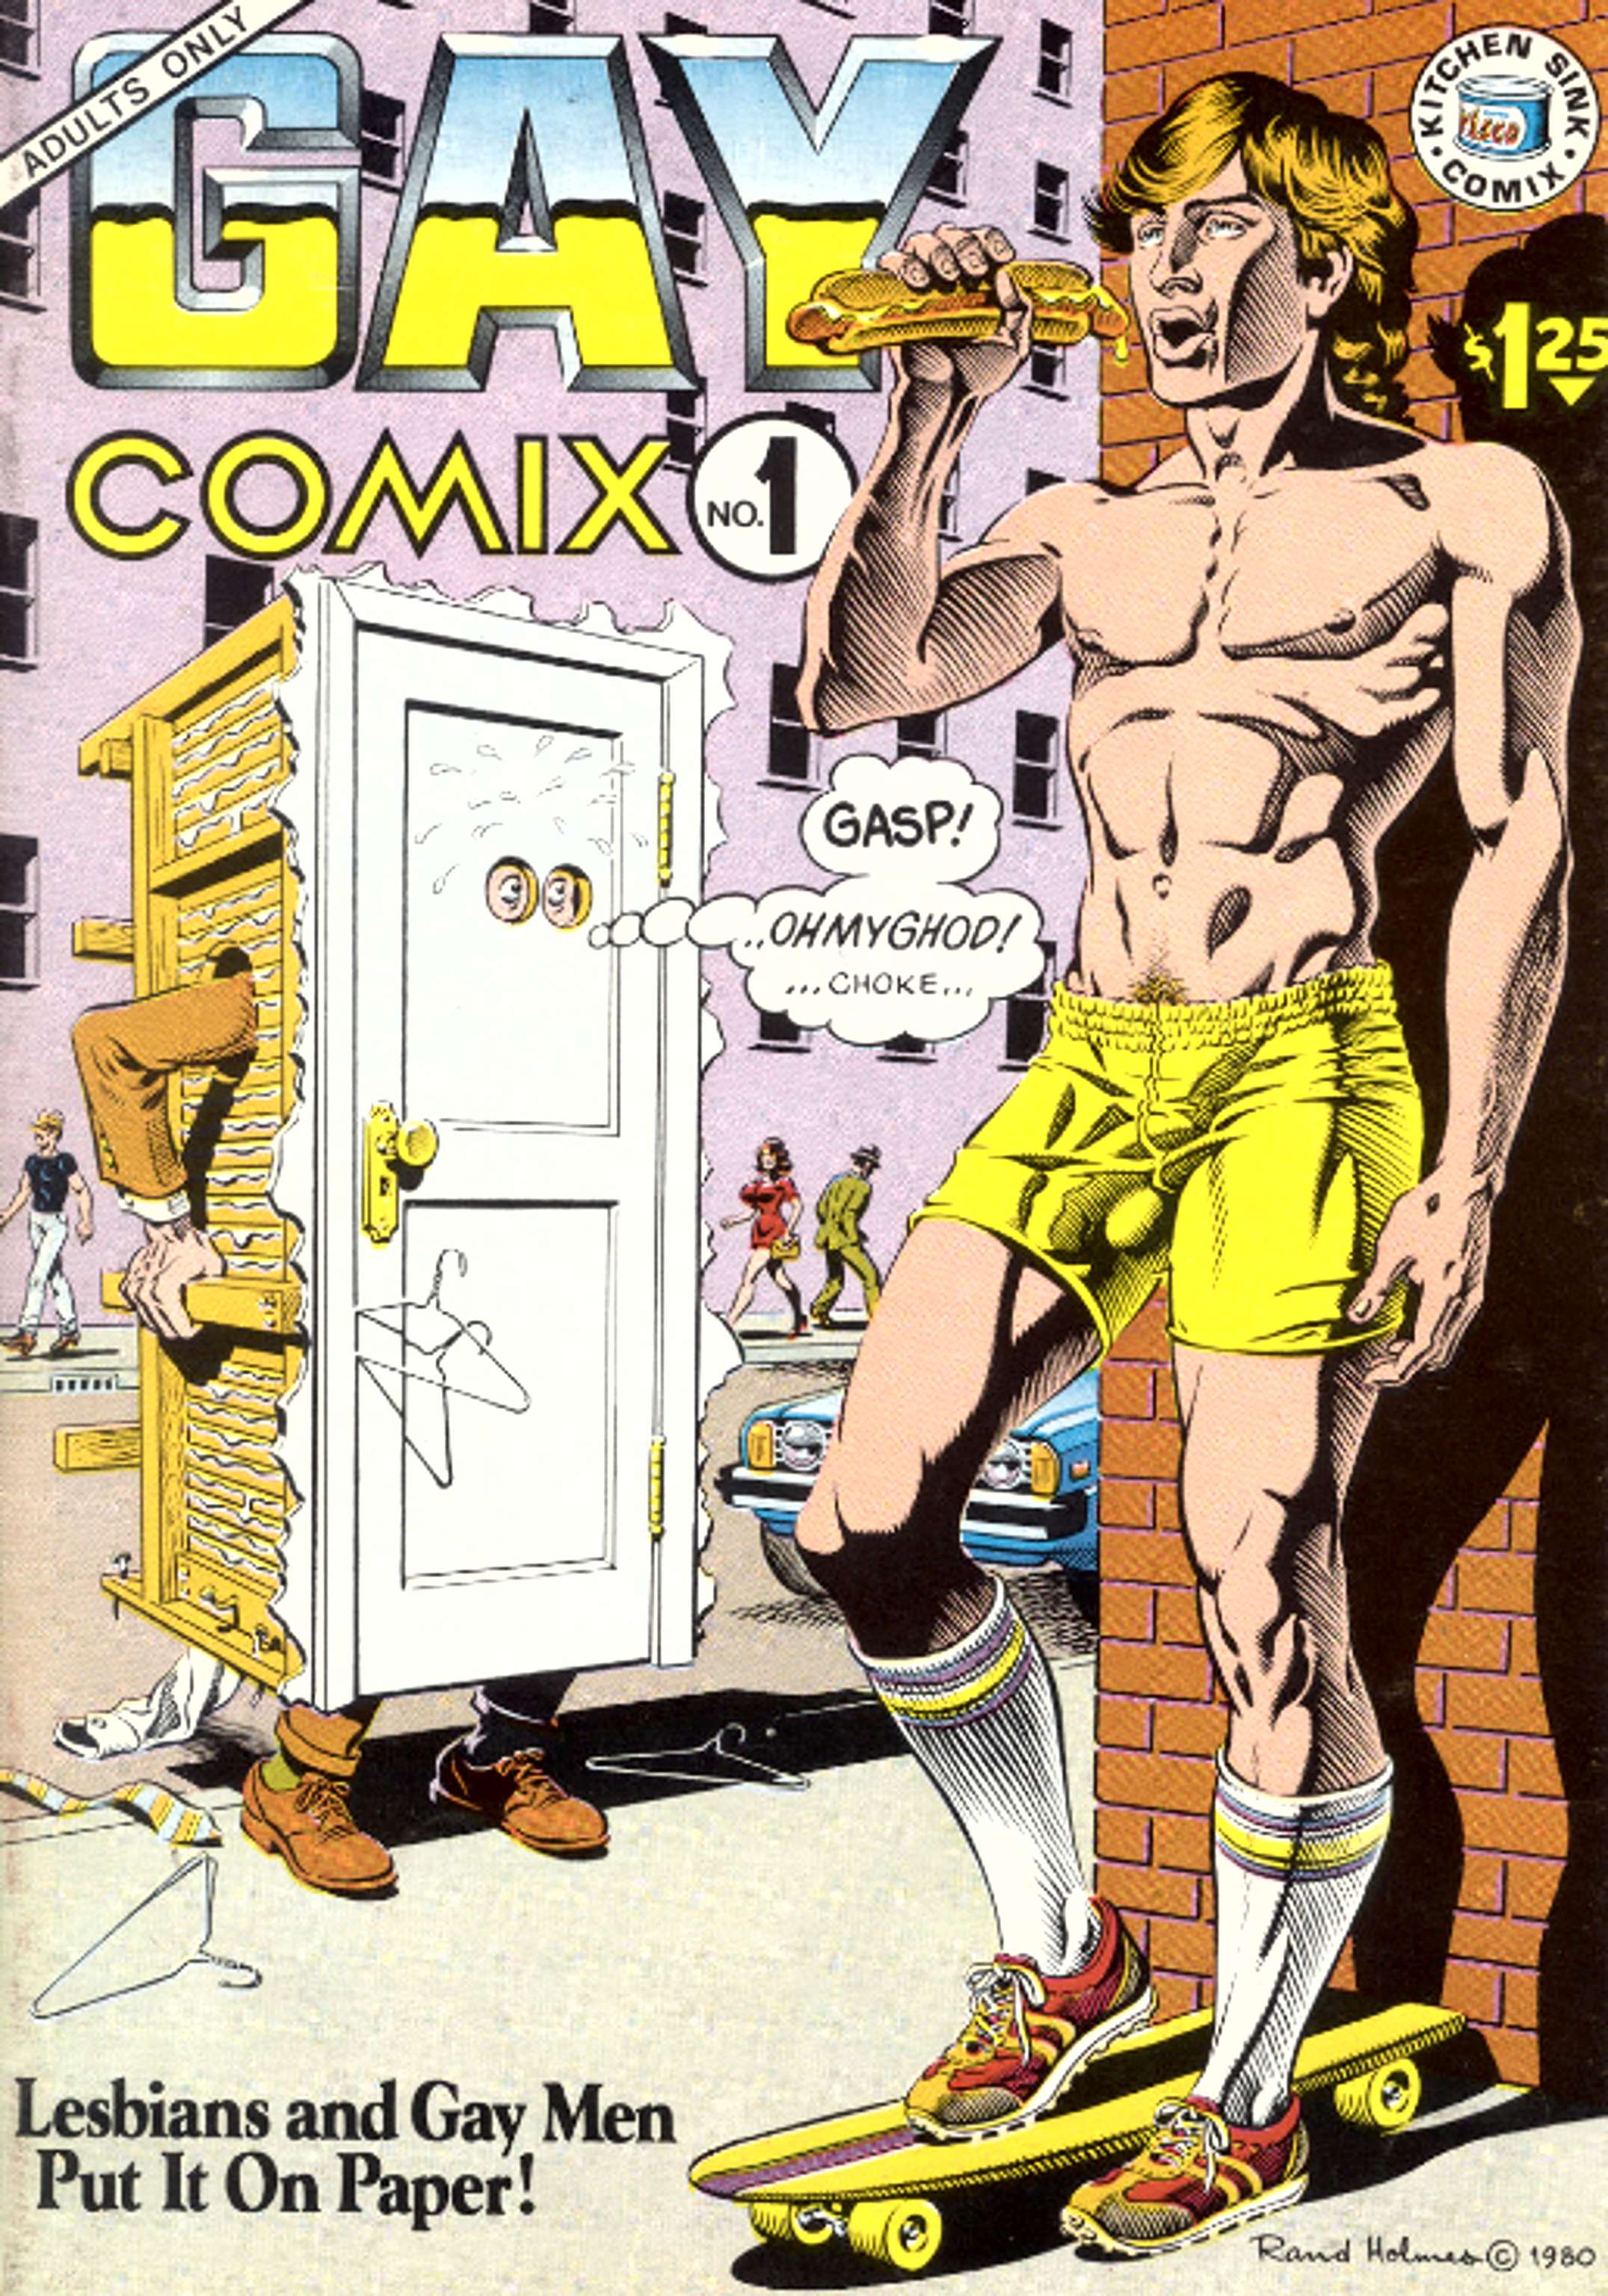 Gay Comix #1, cover art by Rand Holmes